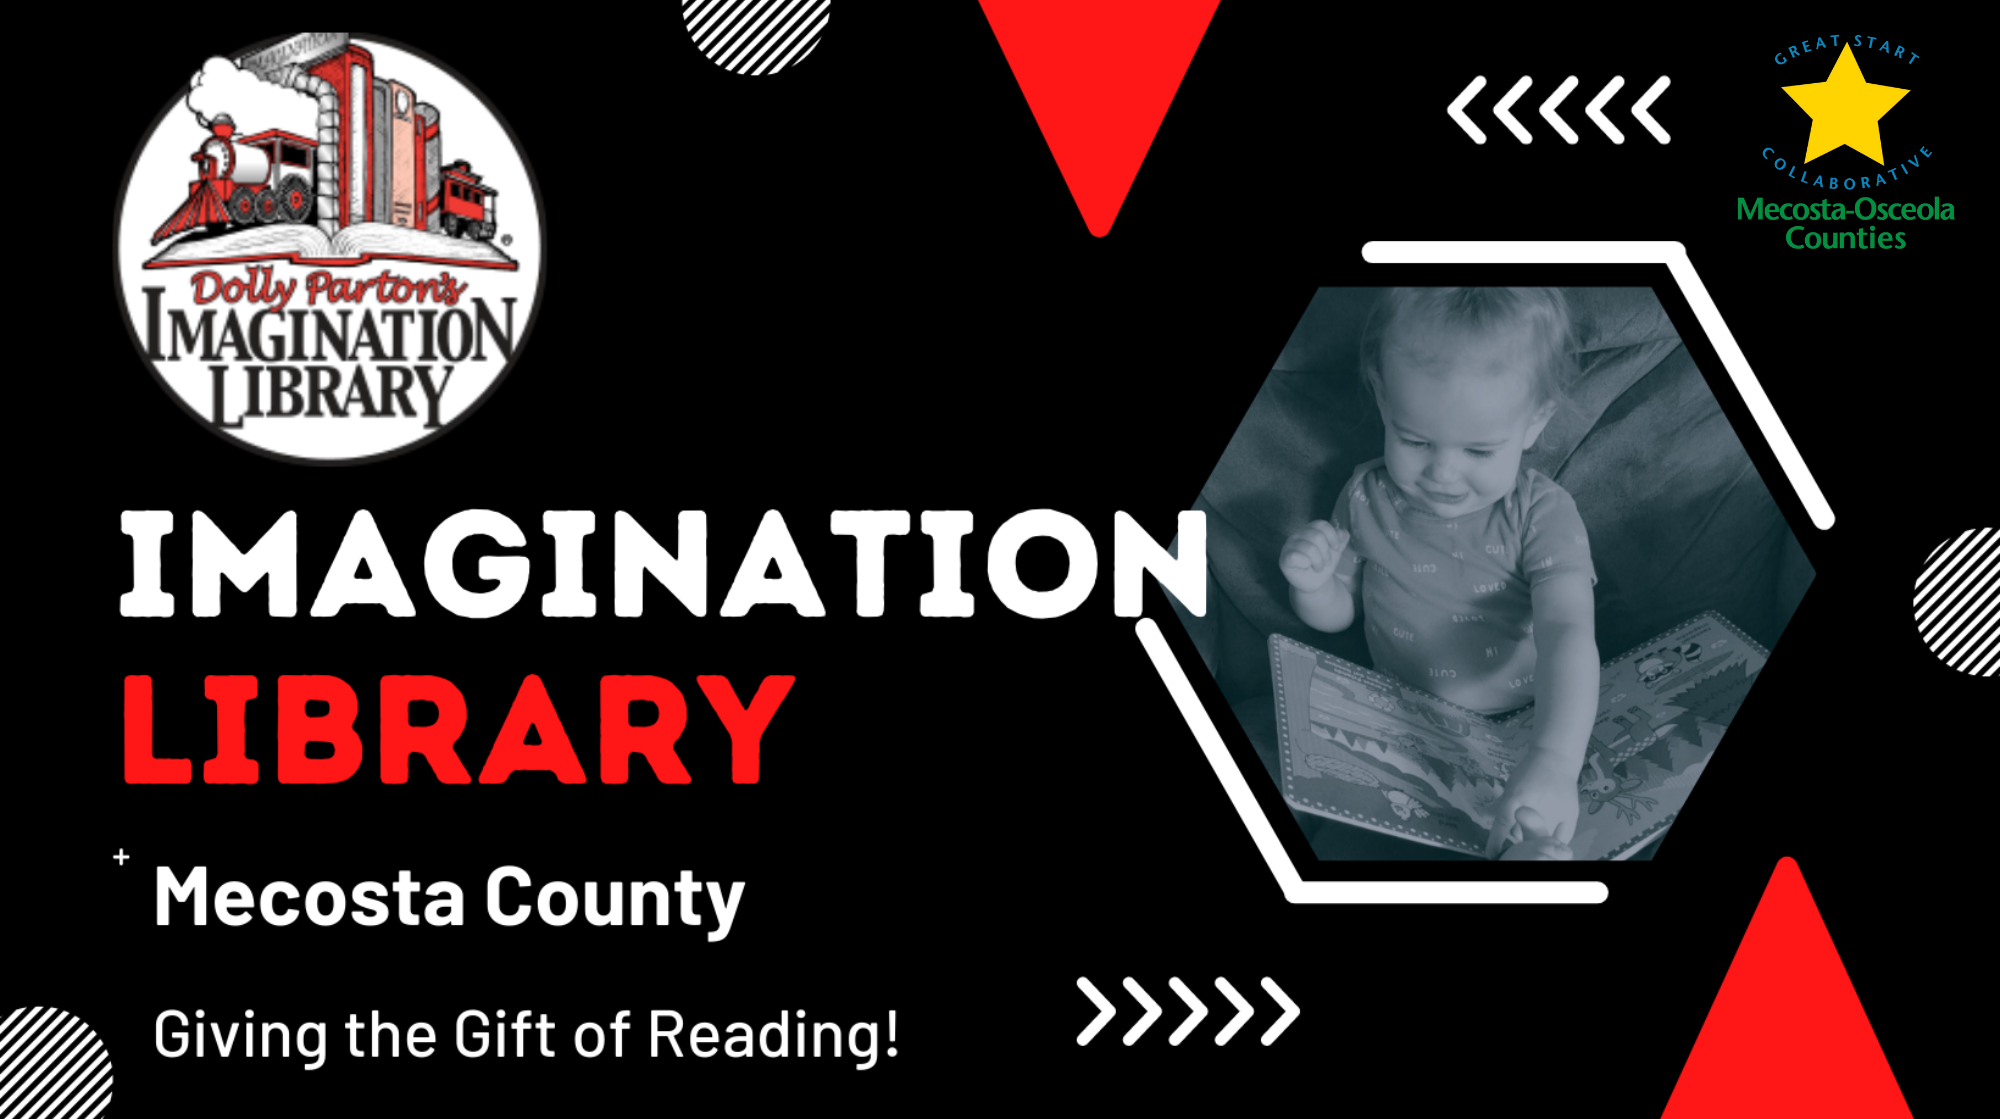 Mecosta County Imagination Library. Giving the Gift of Reading!